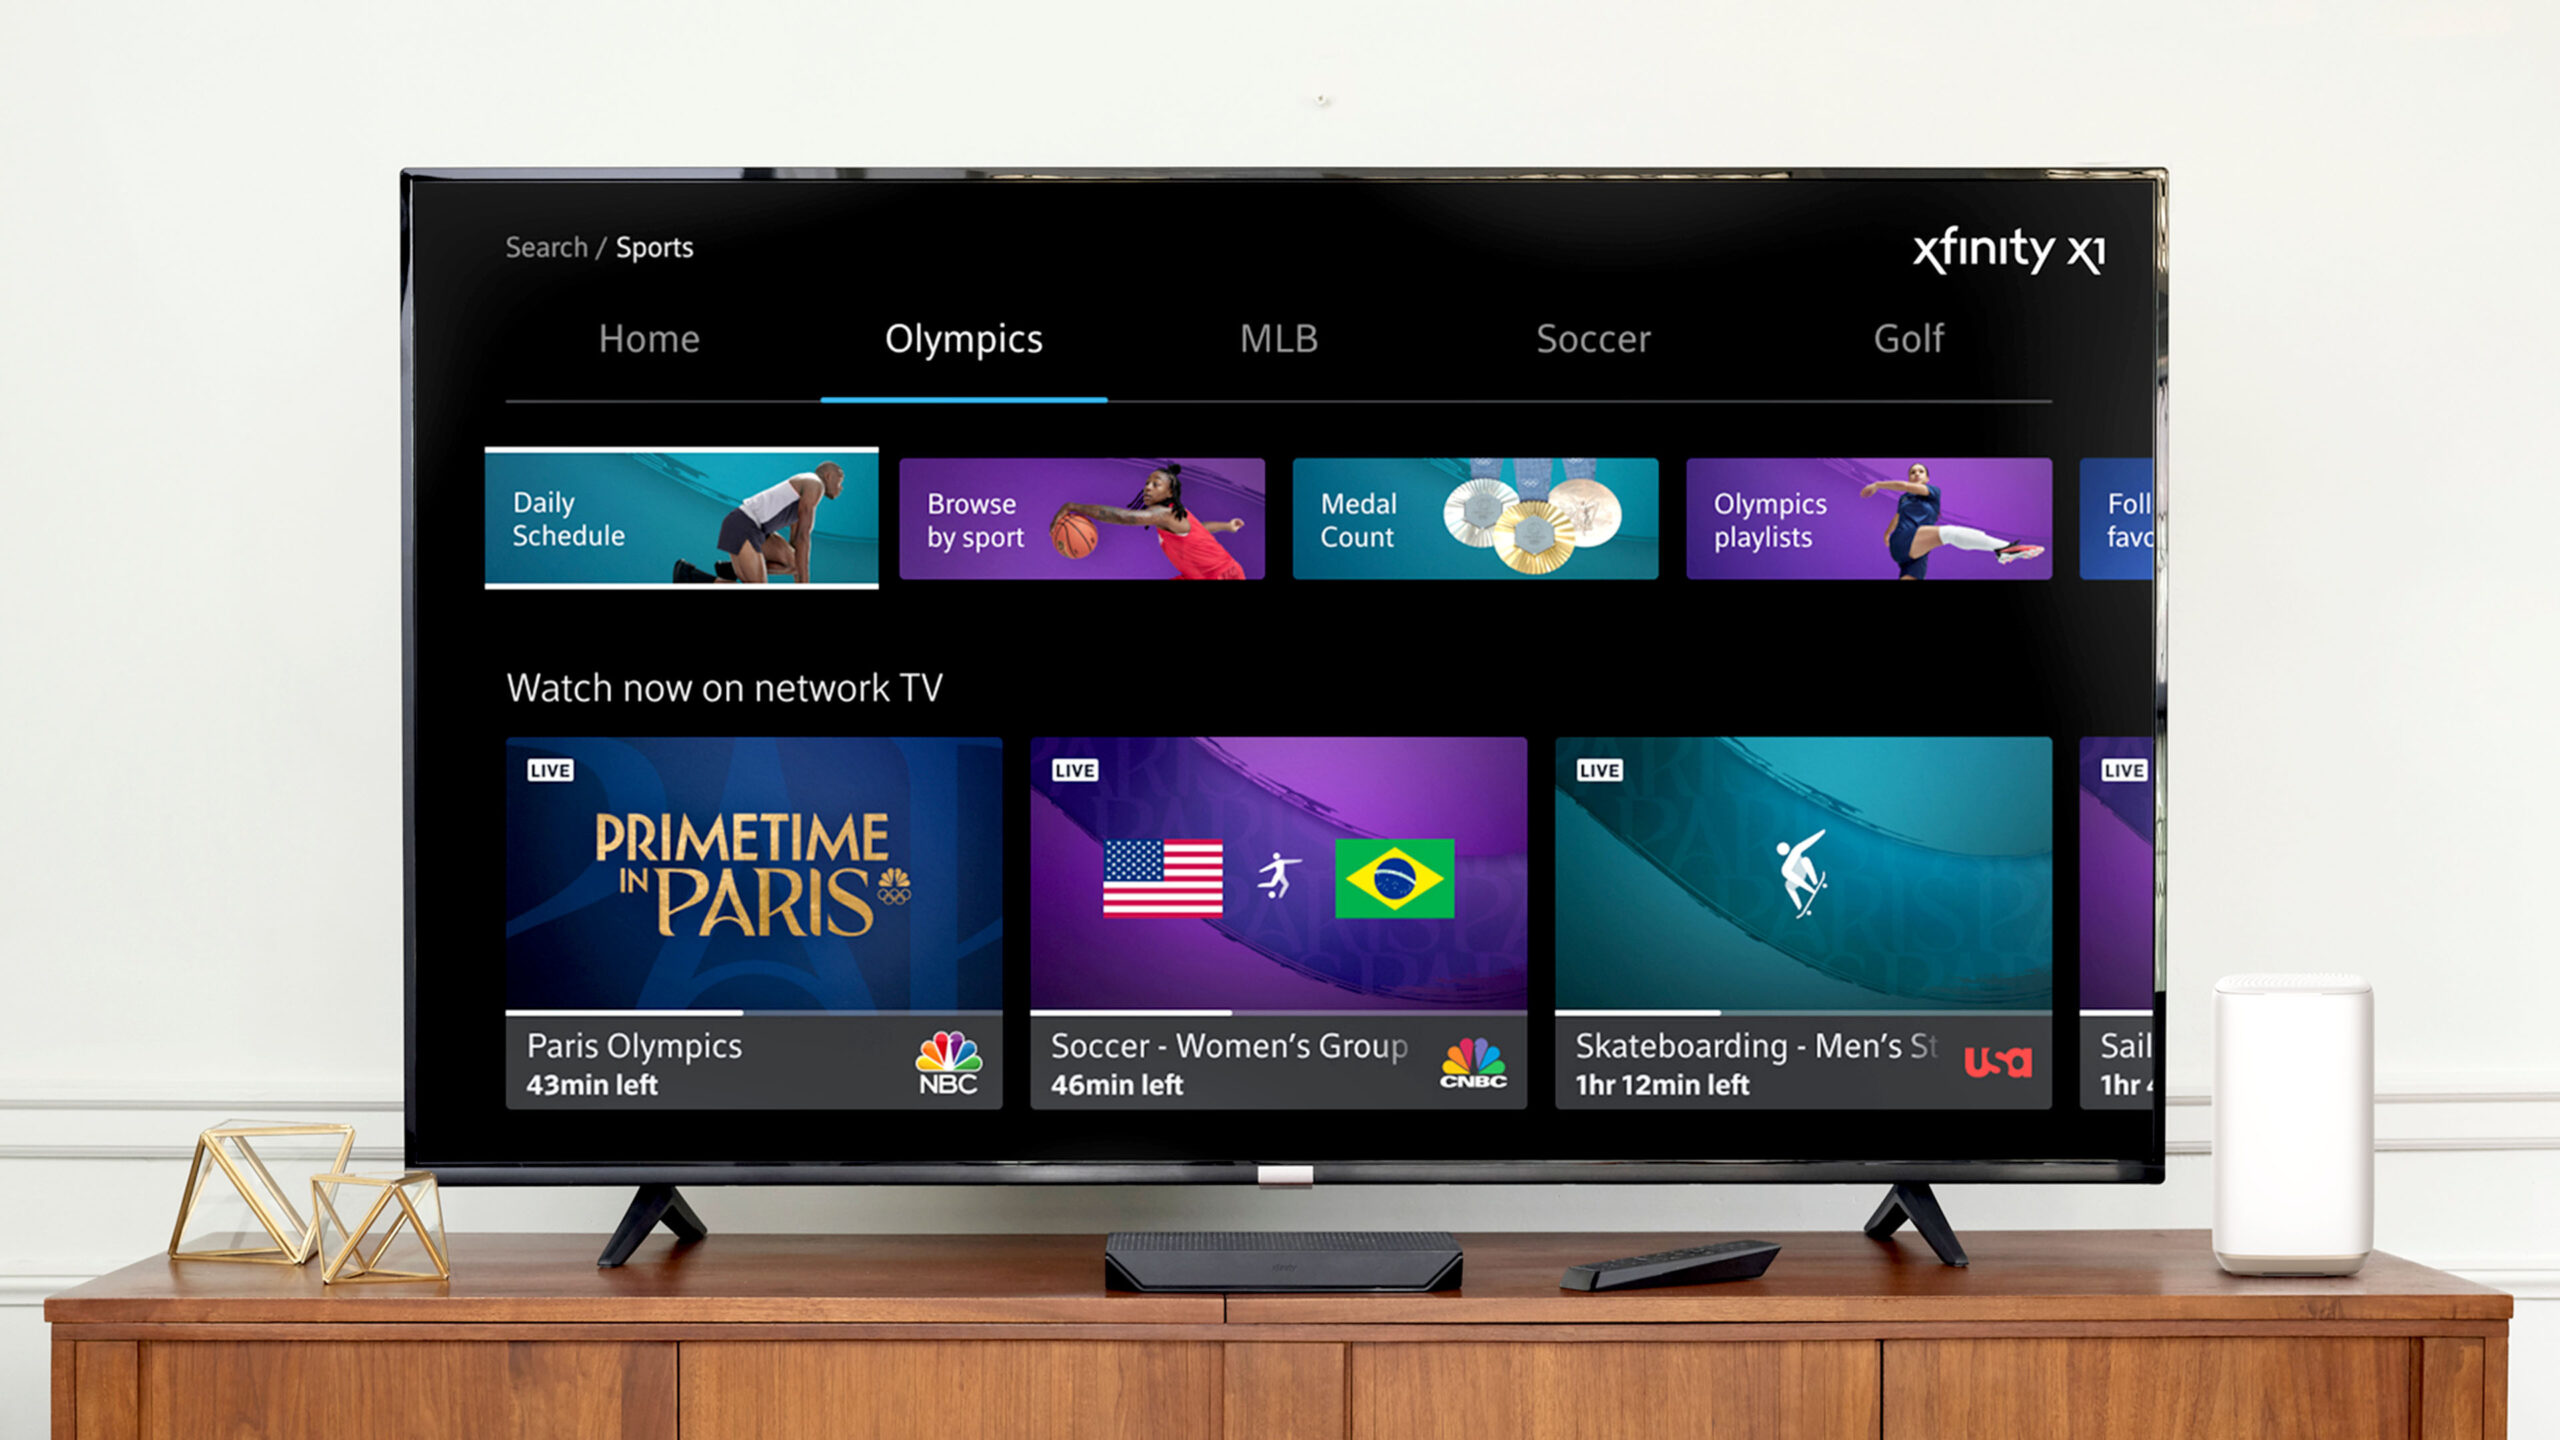 Comcast Debuts First-Ever Enhanced 4K Viewing Experience for the Olympic Games on Xfinity X1